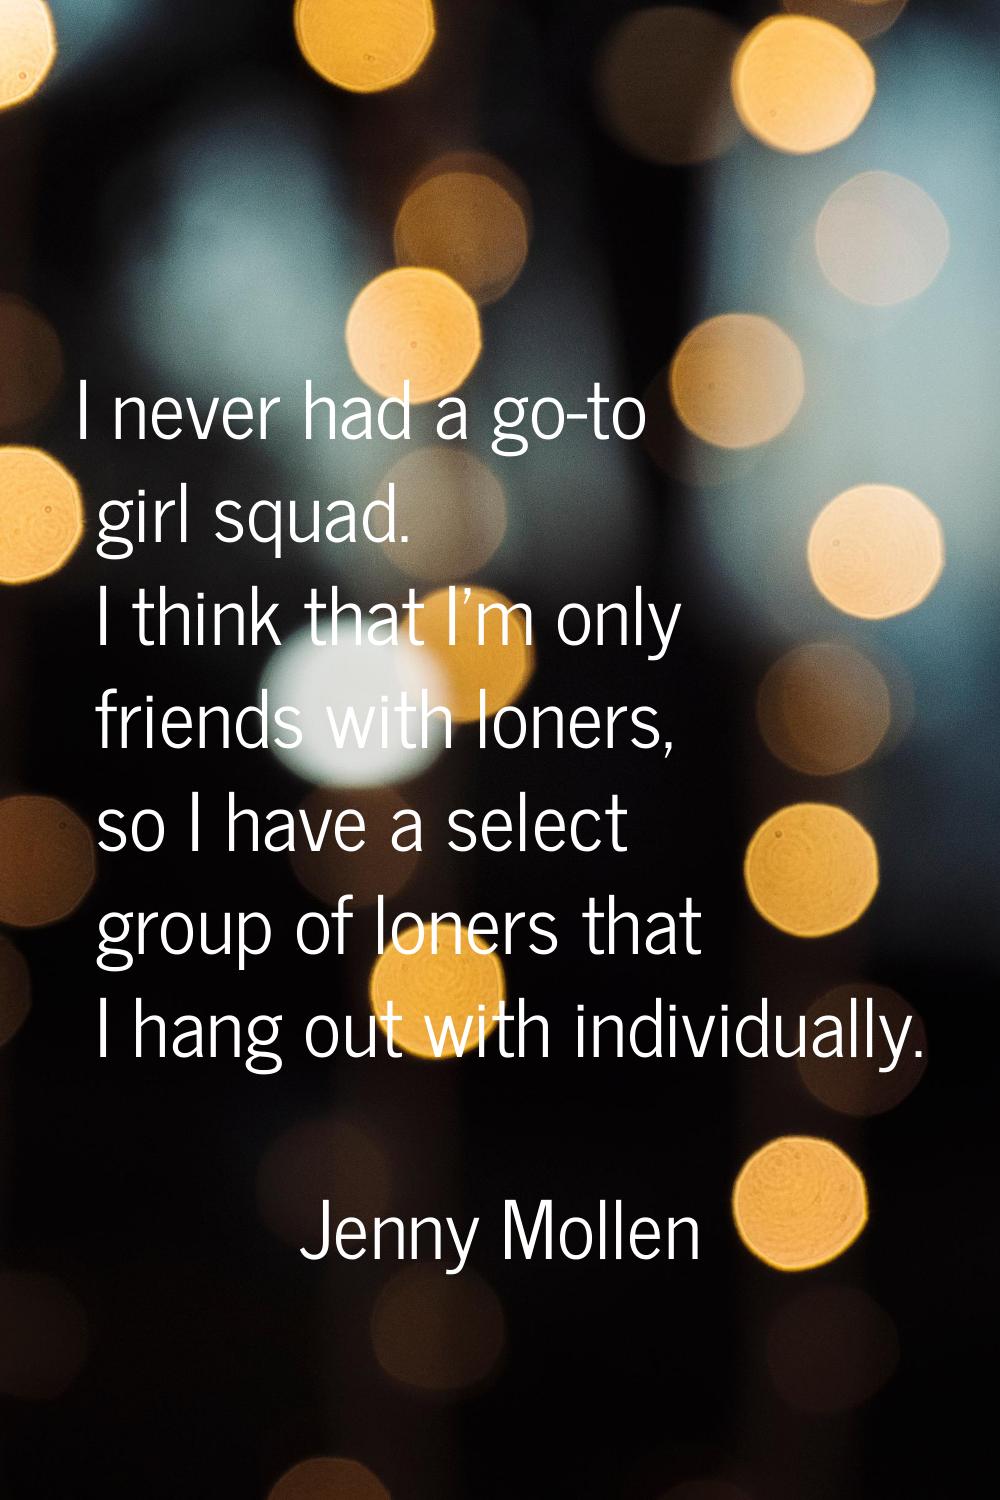 I never had a go-to girl squad. I think that I'm only friends with loners, so I have a select group